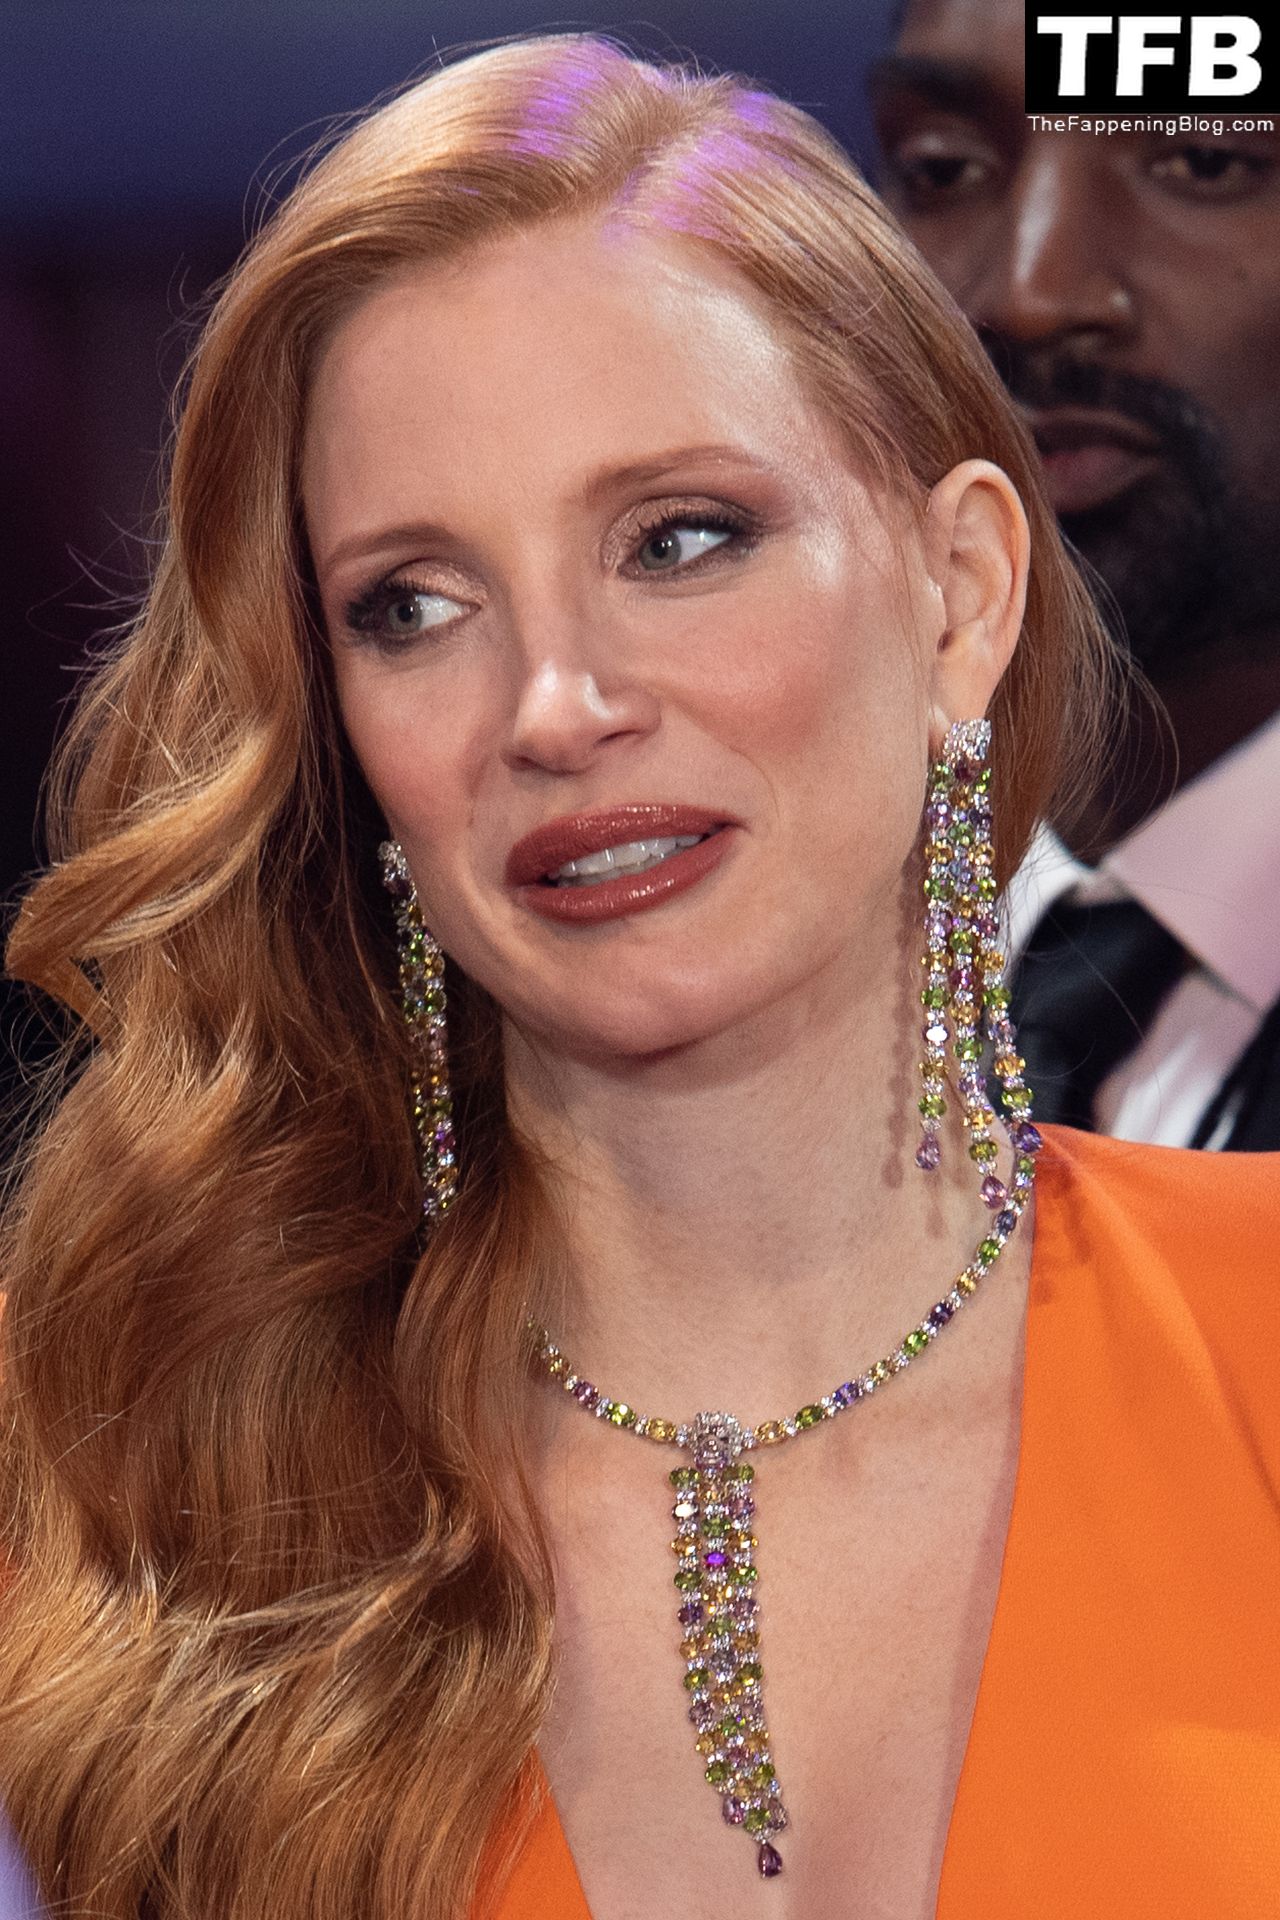 Jessica Chastain Sexy The Fappening Blog 101 - Jessica Chastain Poses for Photographers Upon Arrival for the Premiere of the Film “The Good Nurse” in London (150 Photos)